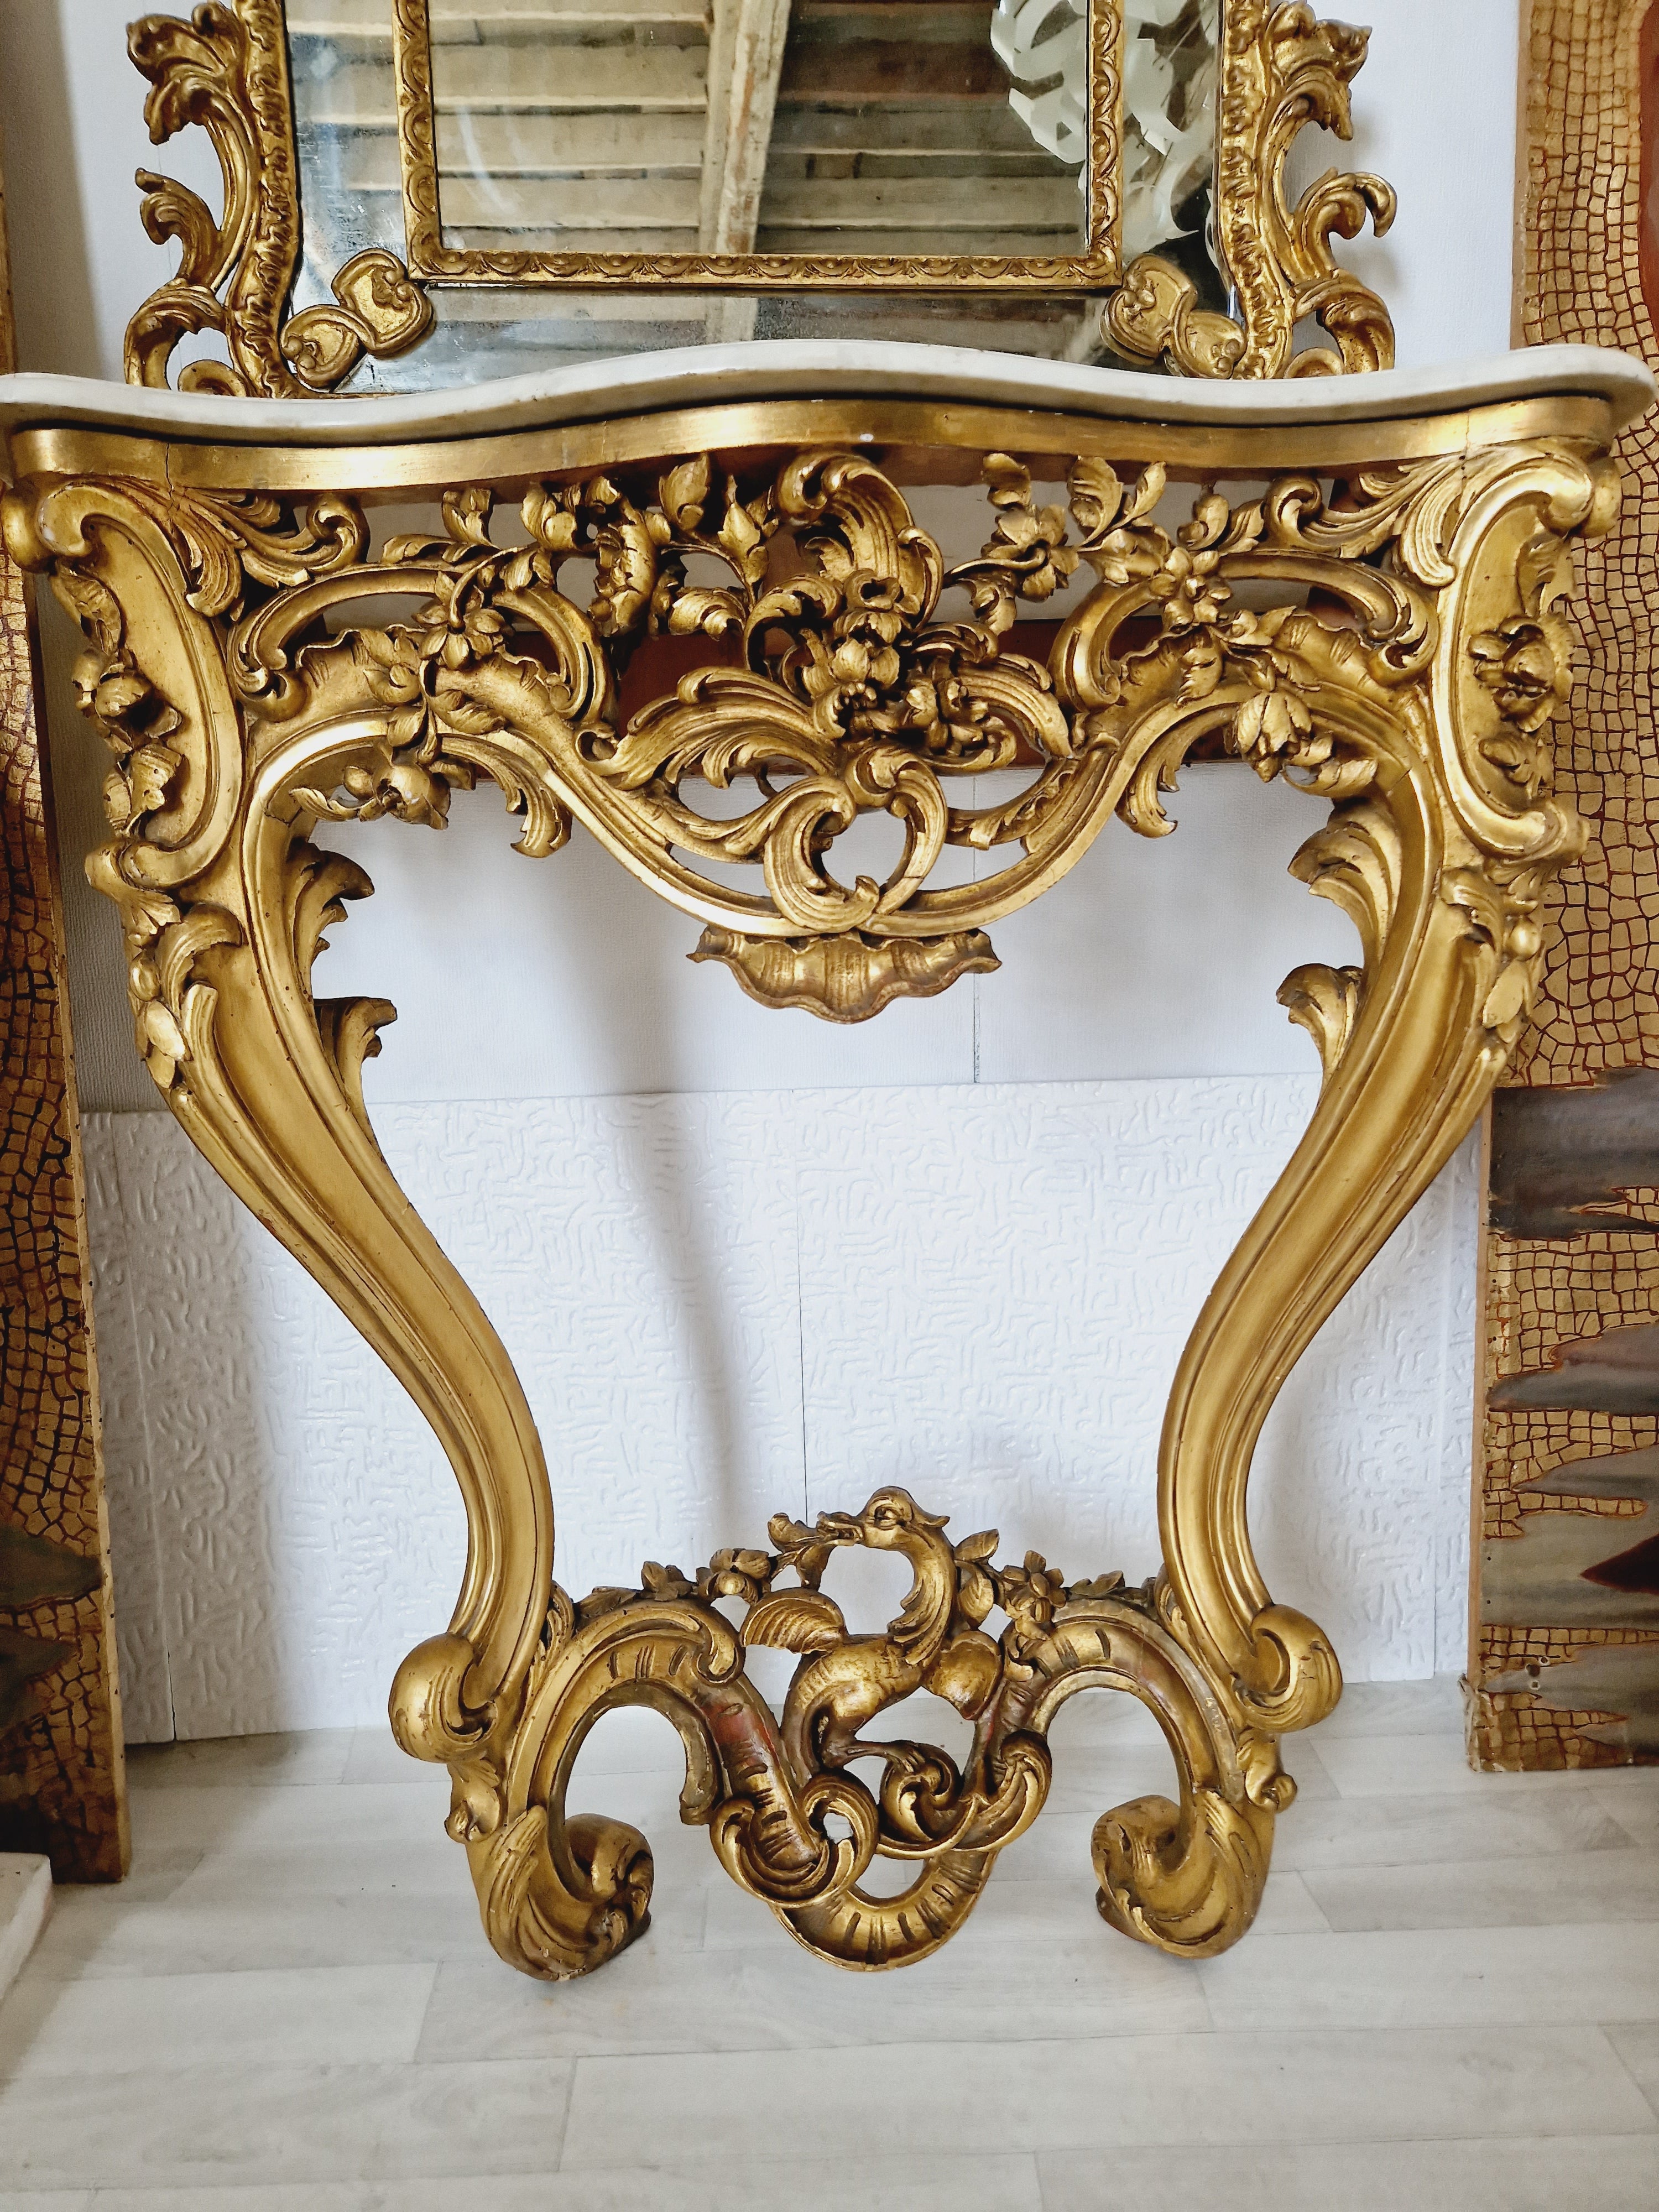 This antique French console table features a beautiful Rococo design from the Louis XV period. Its rectangular shape and fully assembled status make it an ideal addition to any indoor room. The tabletop and material is marble, the console table base